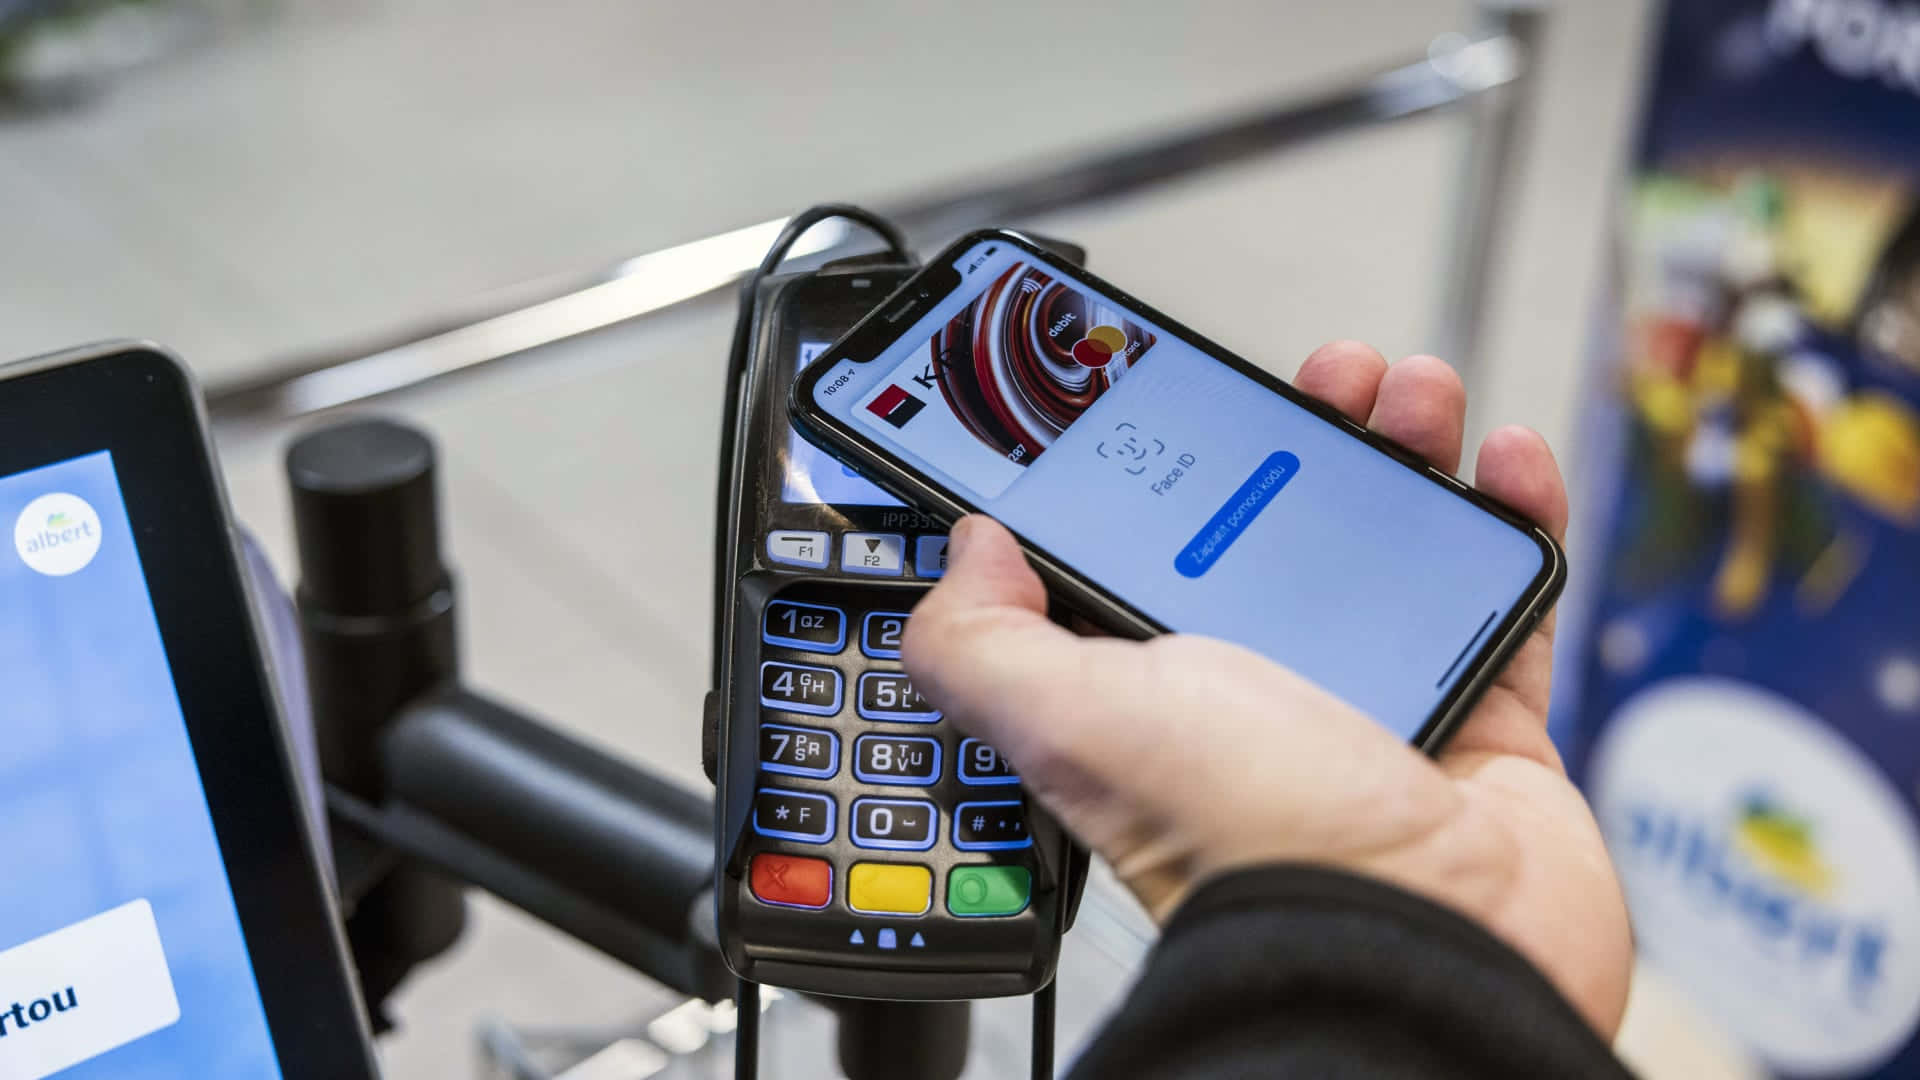 "Make secure payments faster and easier than ever with Apple Pay."